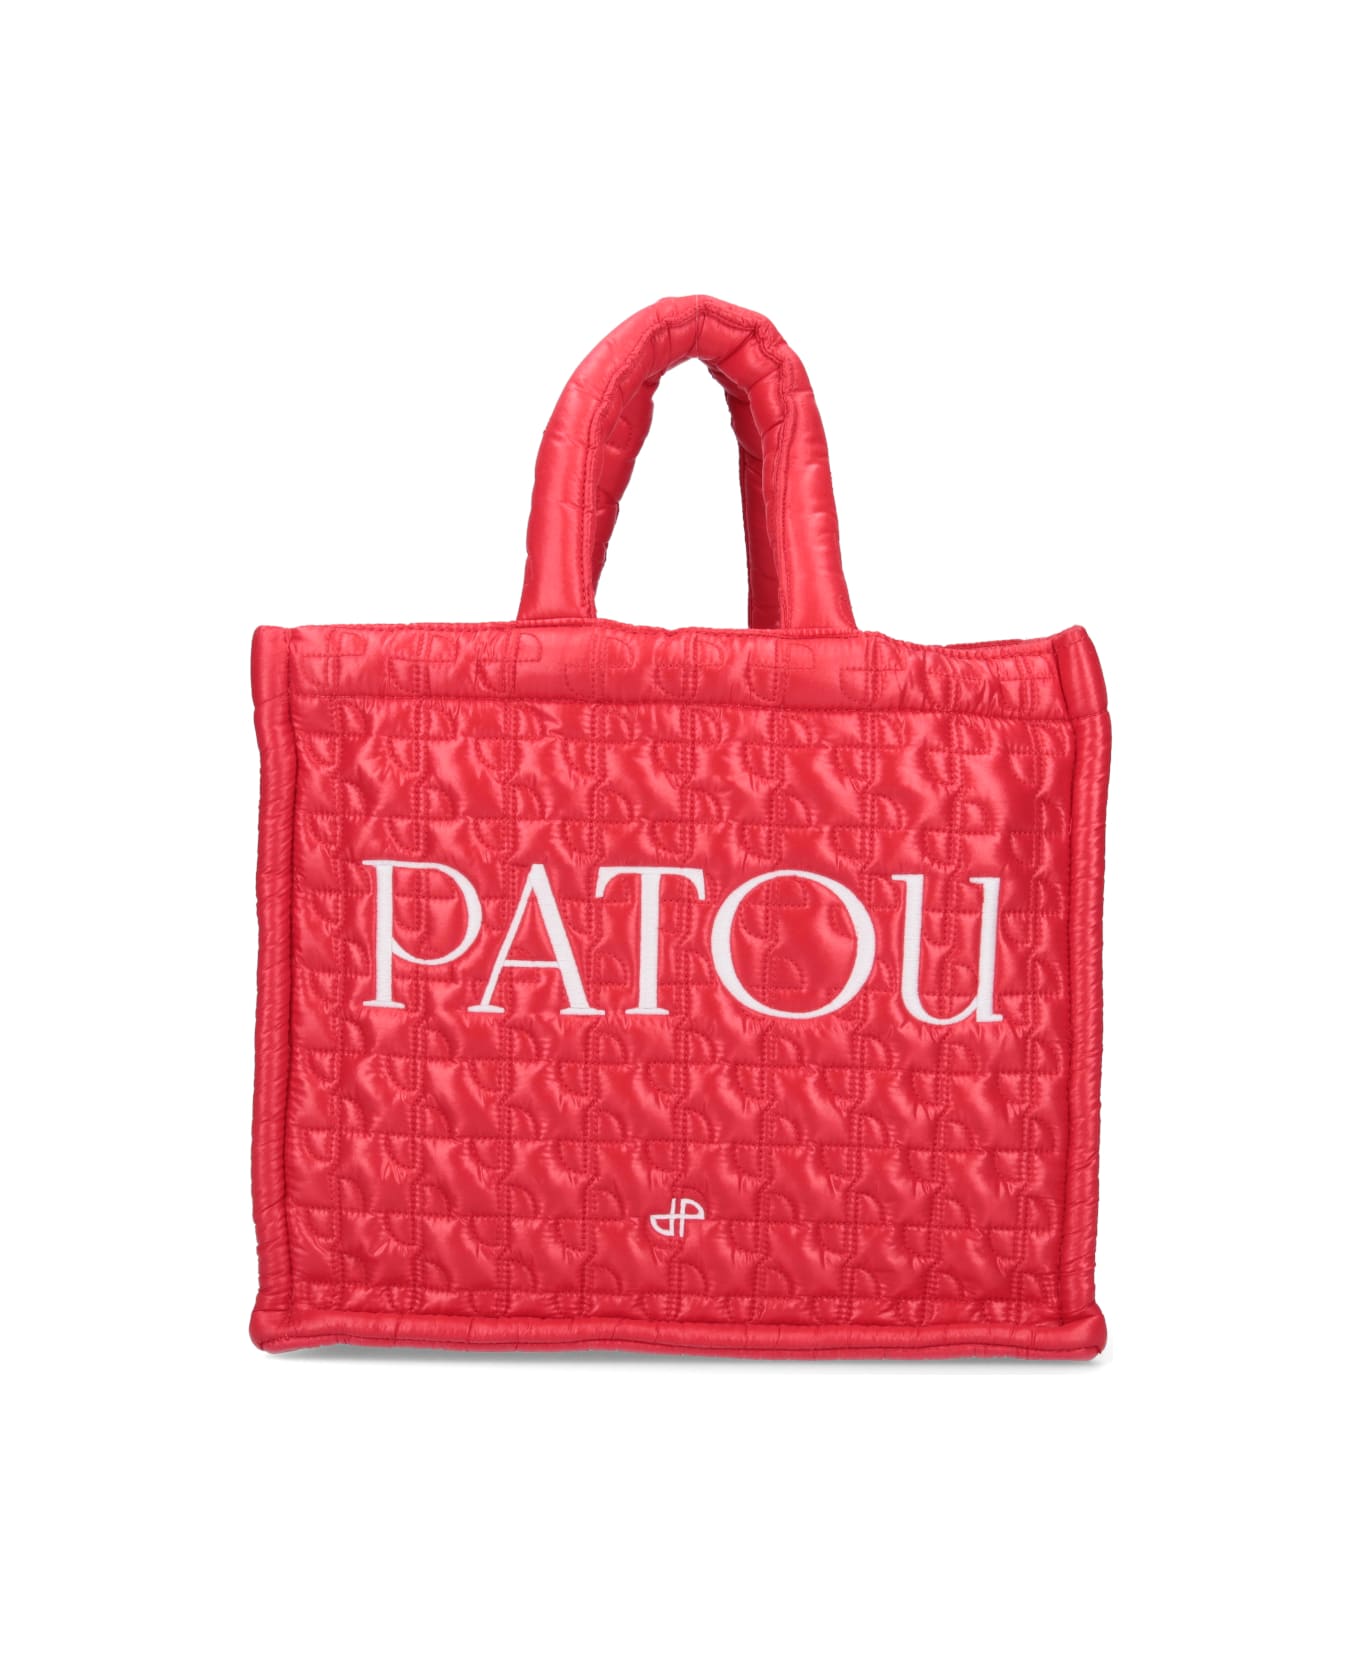 Patou Small Quilted Tote Bag - Rosso トートバッグ